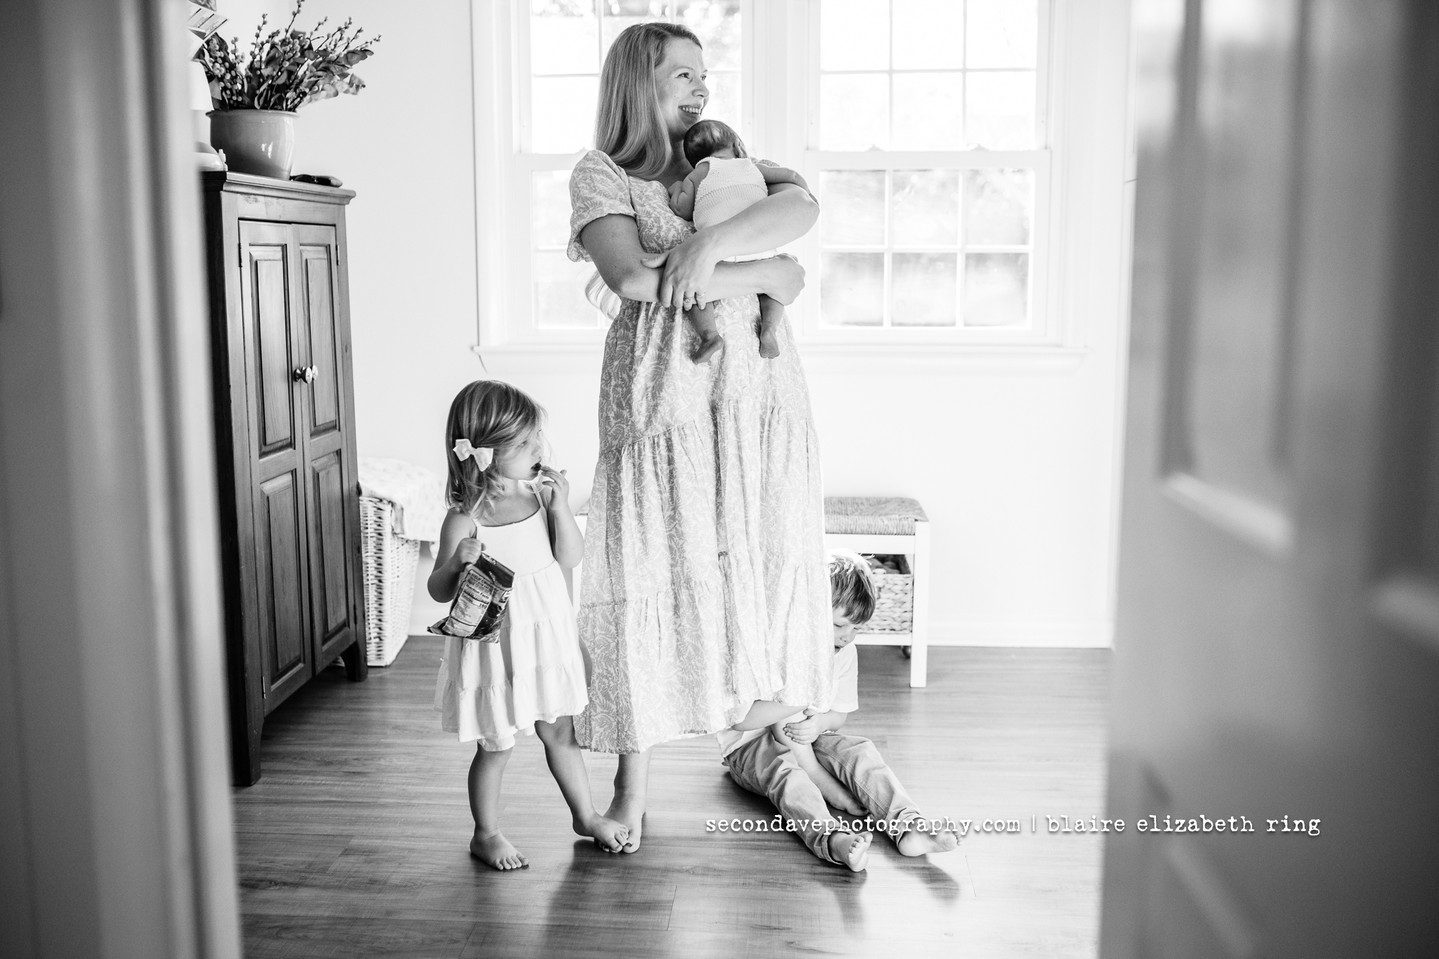 Second Ave Photography is an award winning Washington DC newborn photographer for young families who want timeless portraits that tell their baby's story.